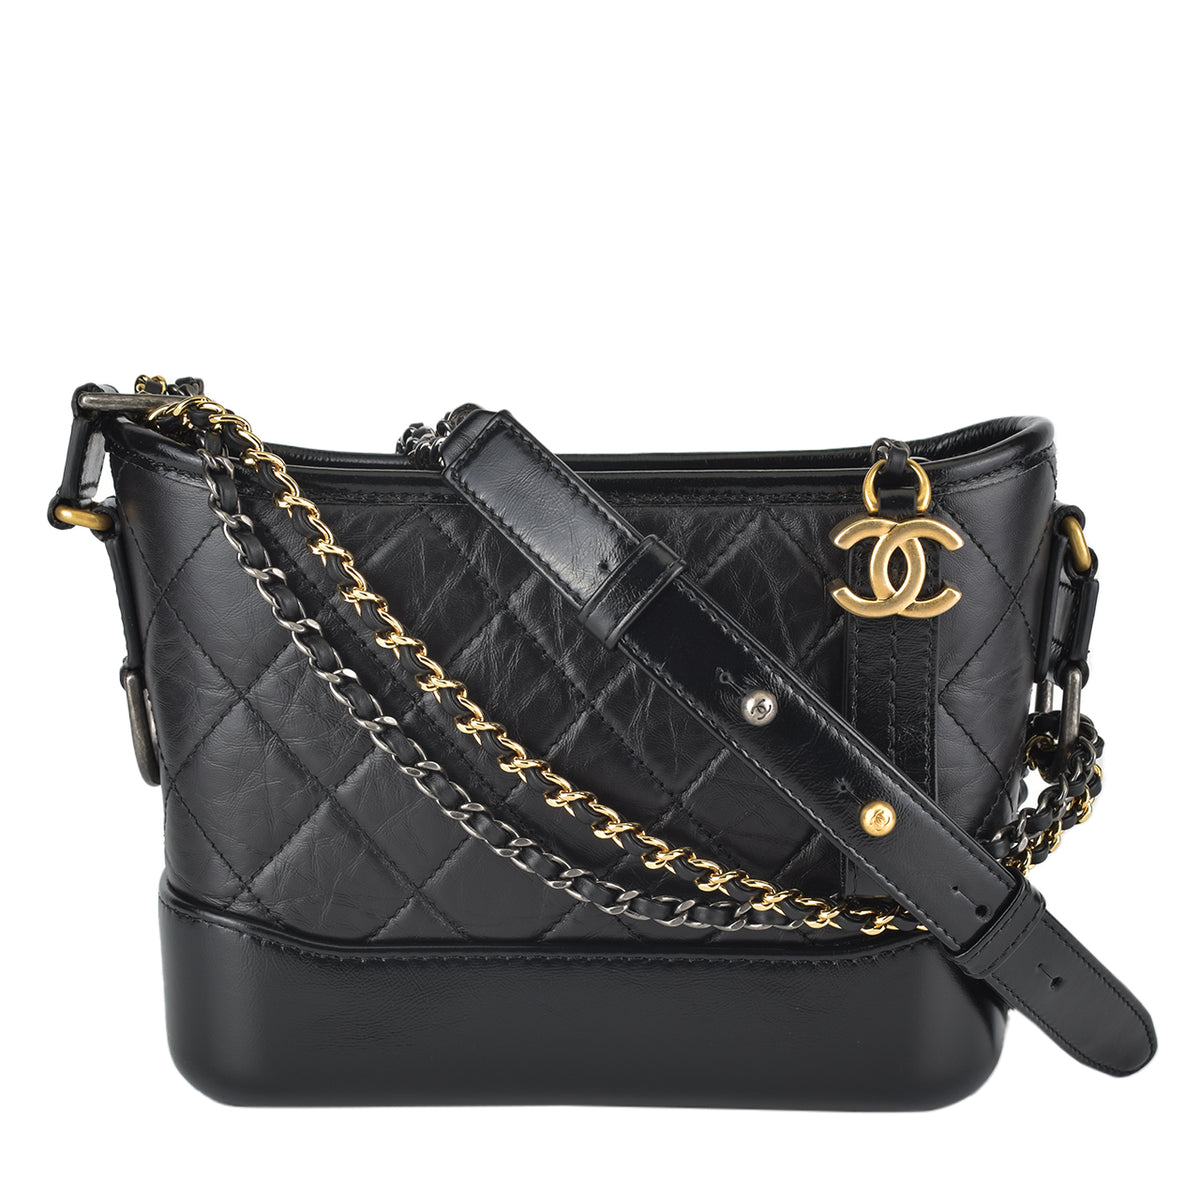 Purse Insert for Chanel's Gabrielle Small Hobo Bag (Style A91810)